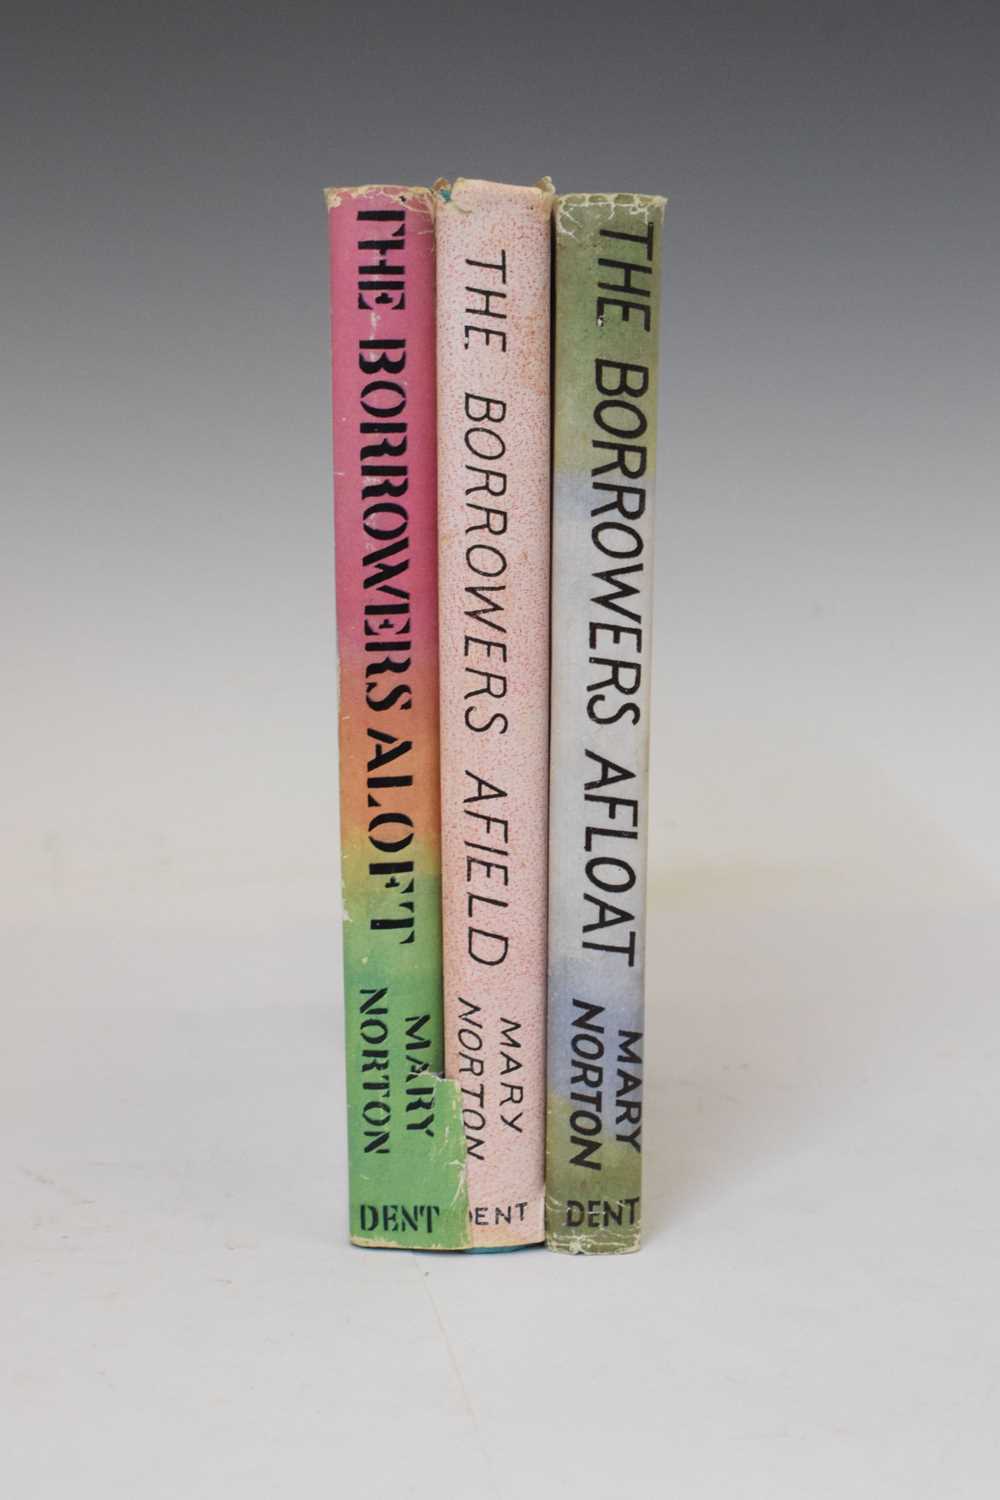 Norton, Mary - The Borrowers 'Aloft', 'Afloat', and 'Afield' - first editions with dust wrappers - Image 3 of 12